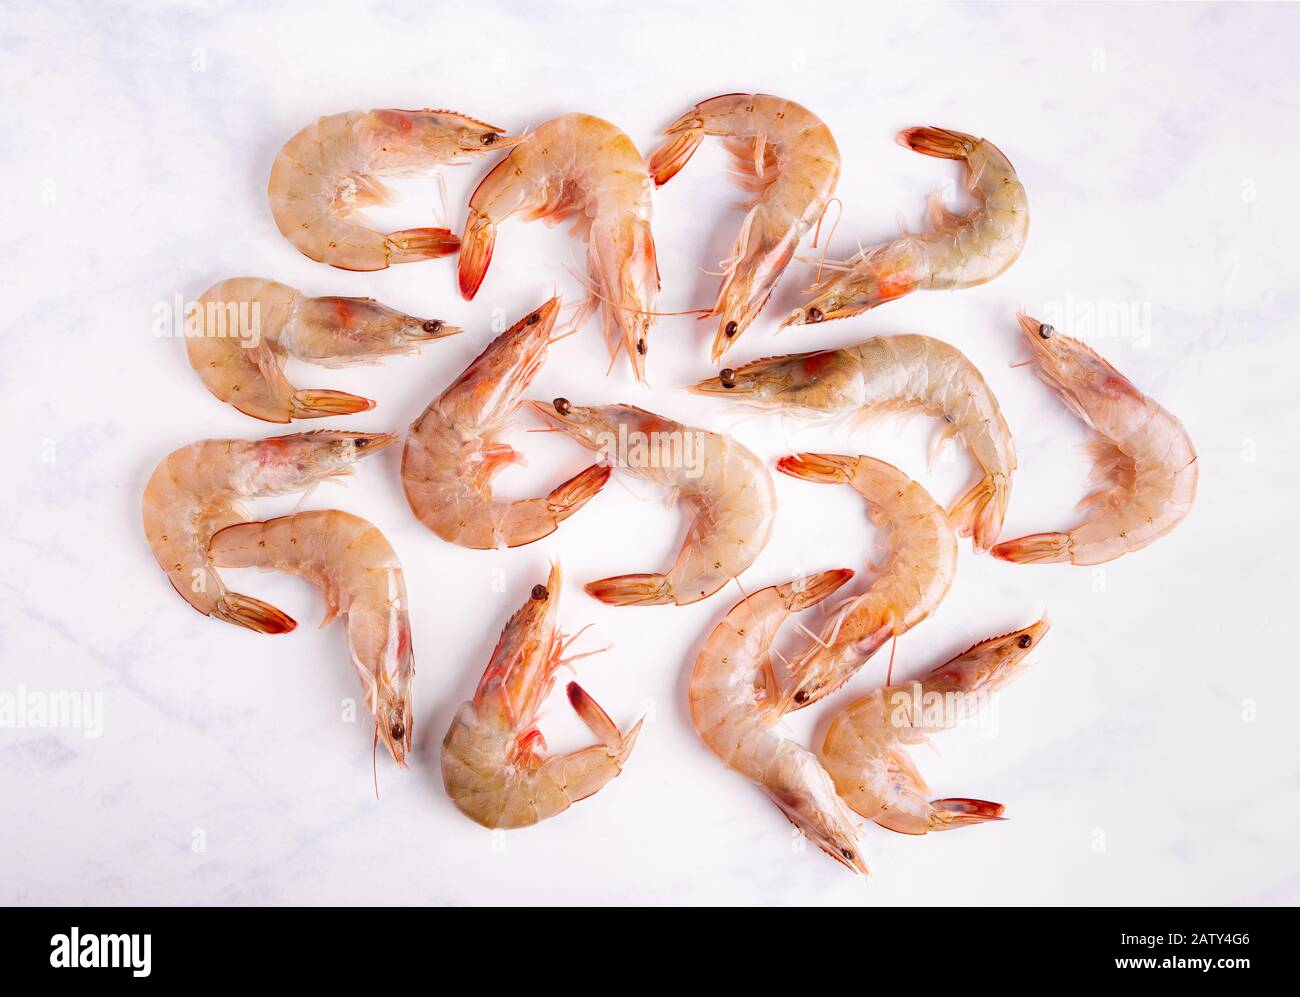 Overhead view of raw shrimp on a marbled surface Stock Photo